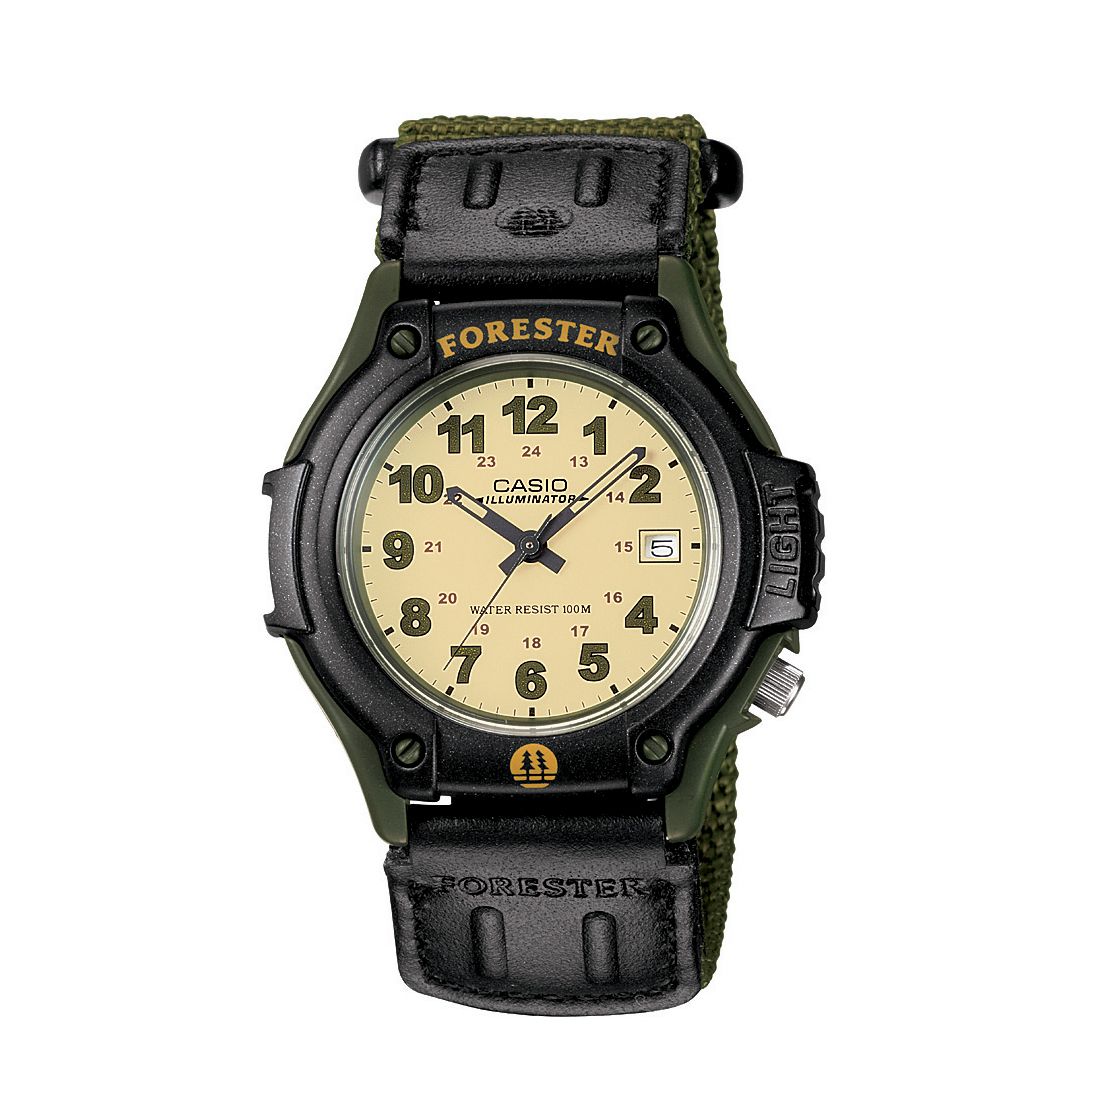 Casio Men's Calendar Date Watch w/Round Black Case, Off-White Dial and Green Fabric Band